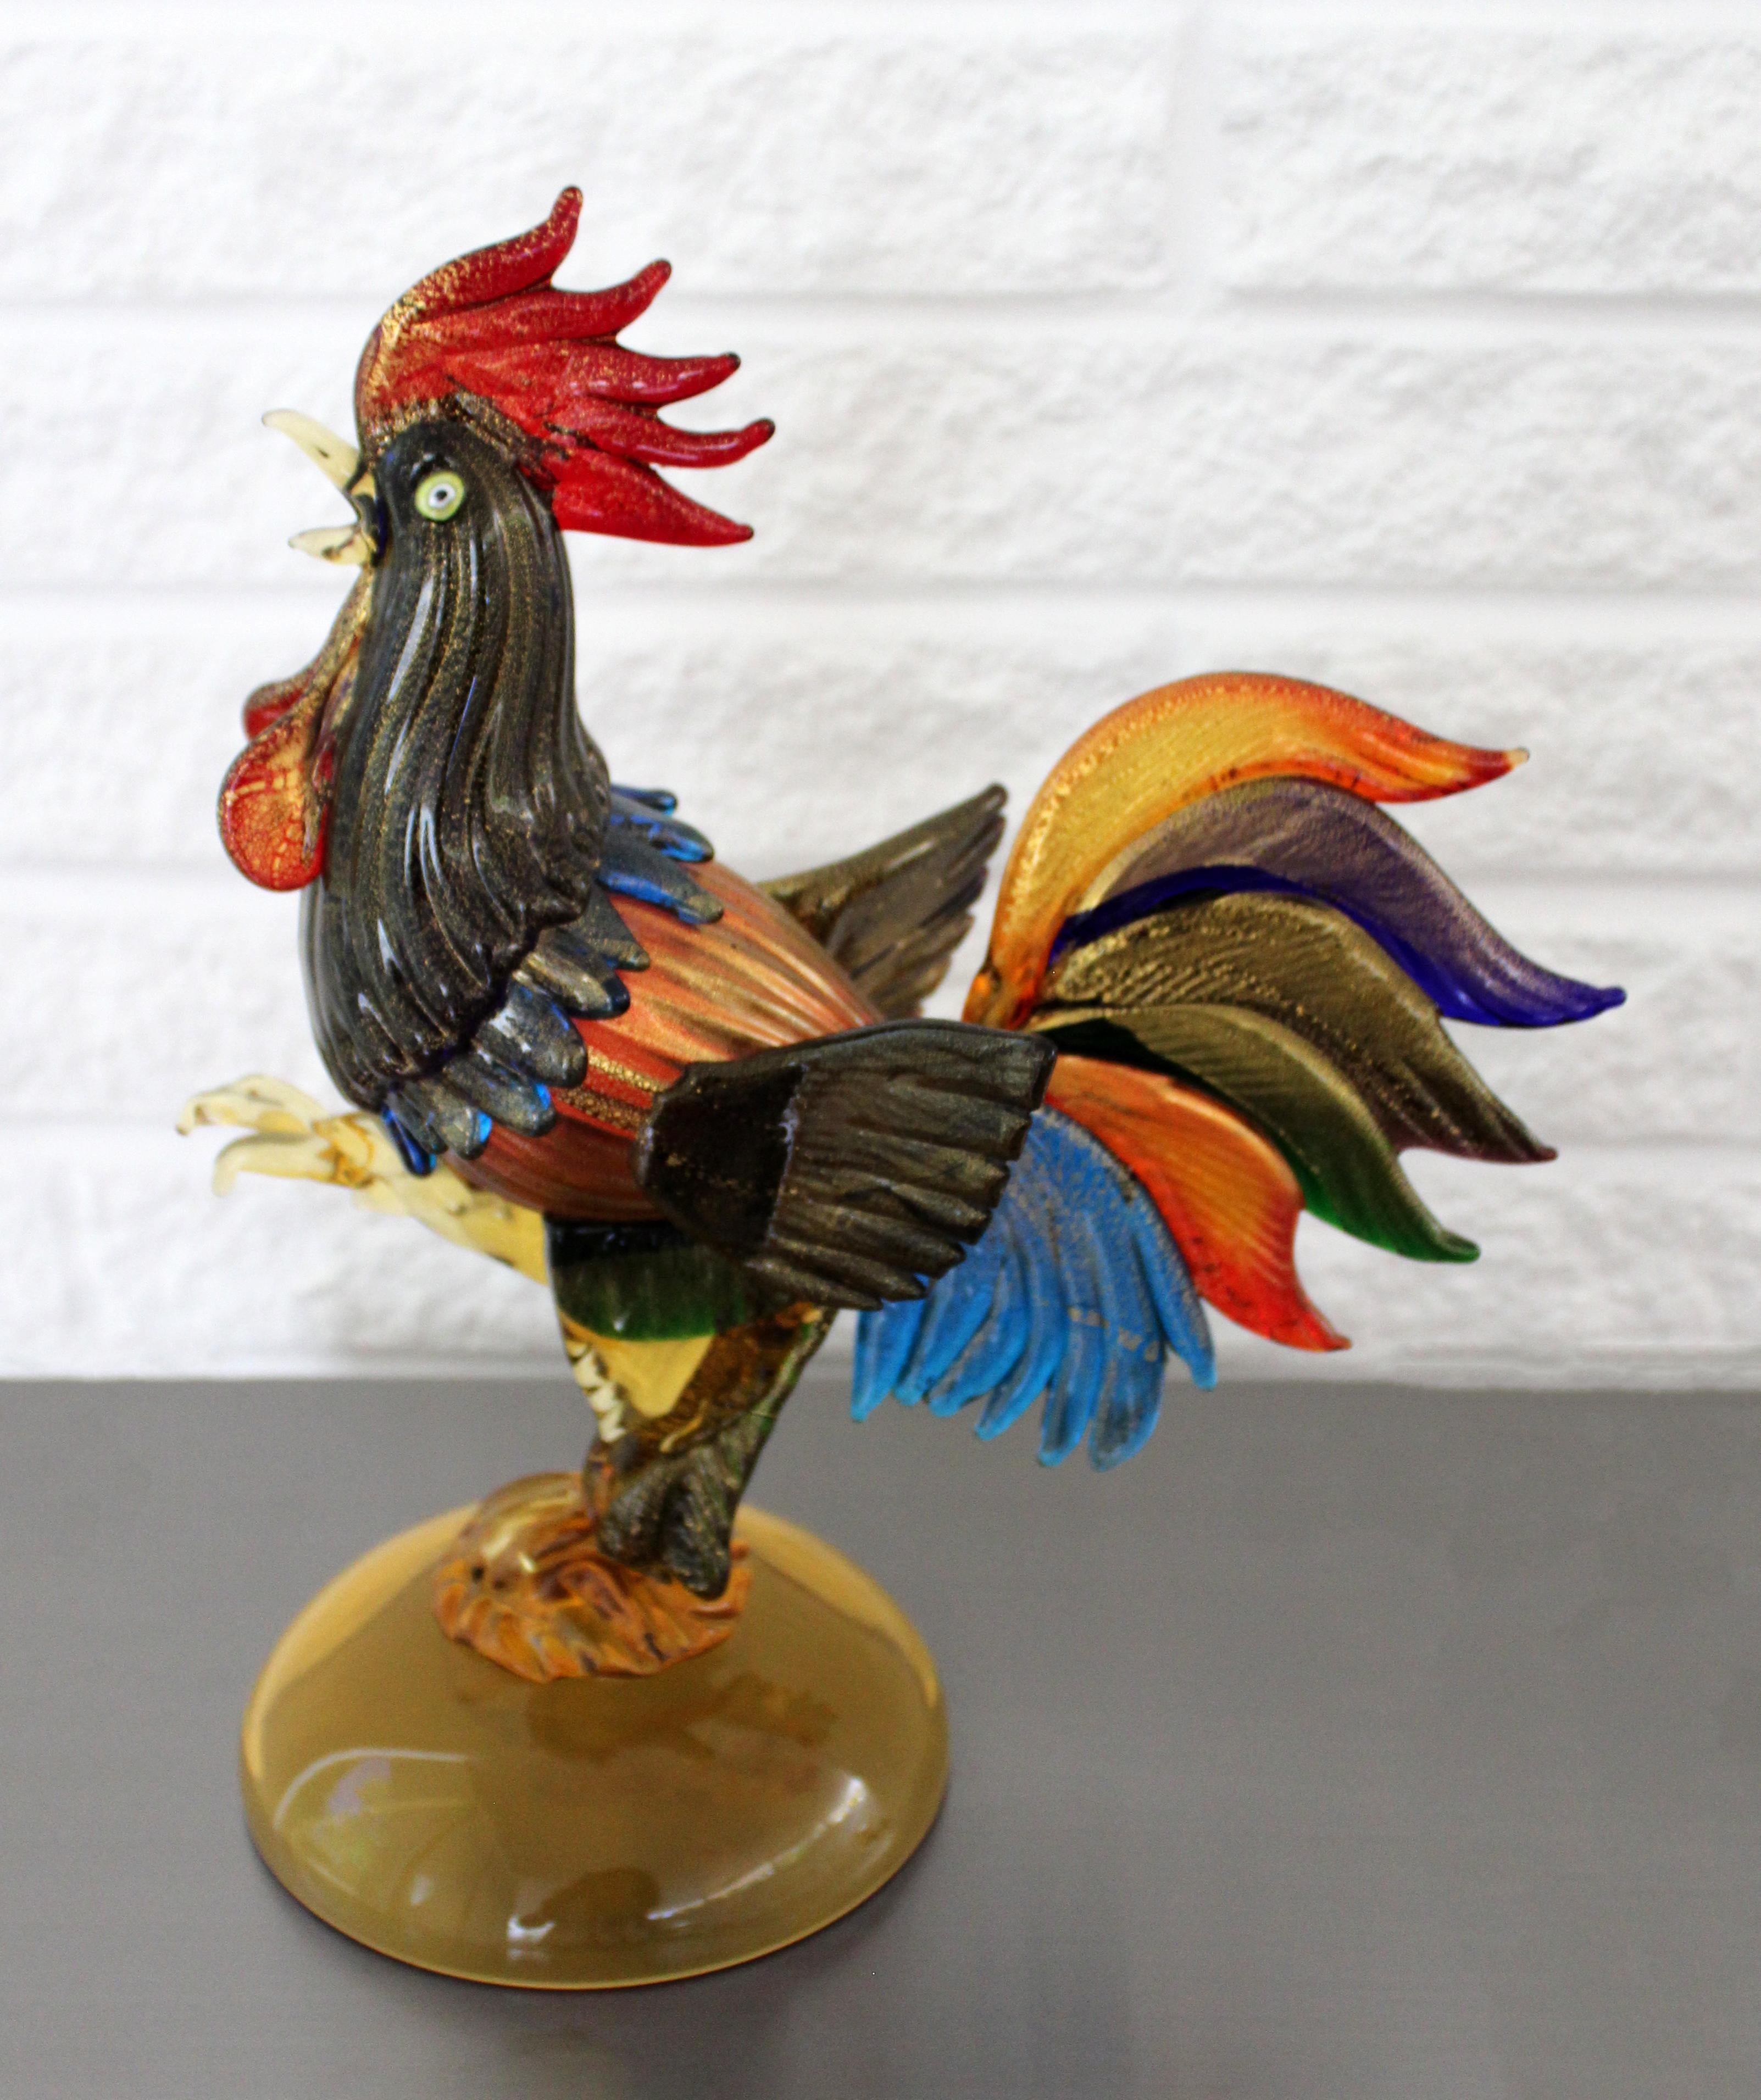 For your consideration is a gorgeous, Murano glass rooster table sculpture, made in Italy, circa 1950s. In excellent condition. The dimensions are 12